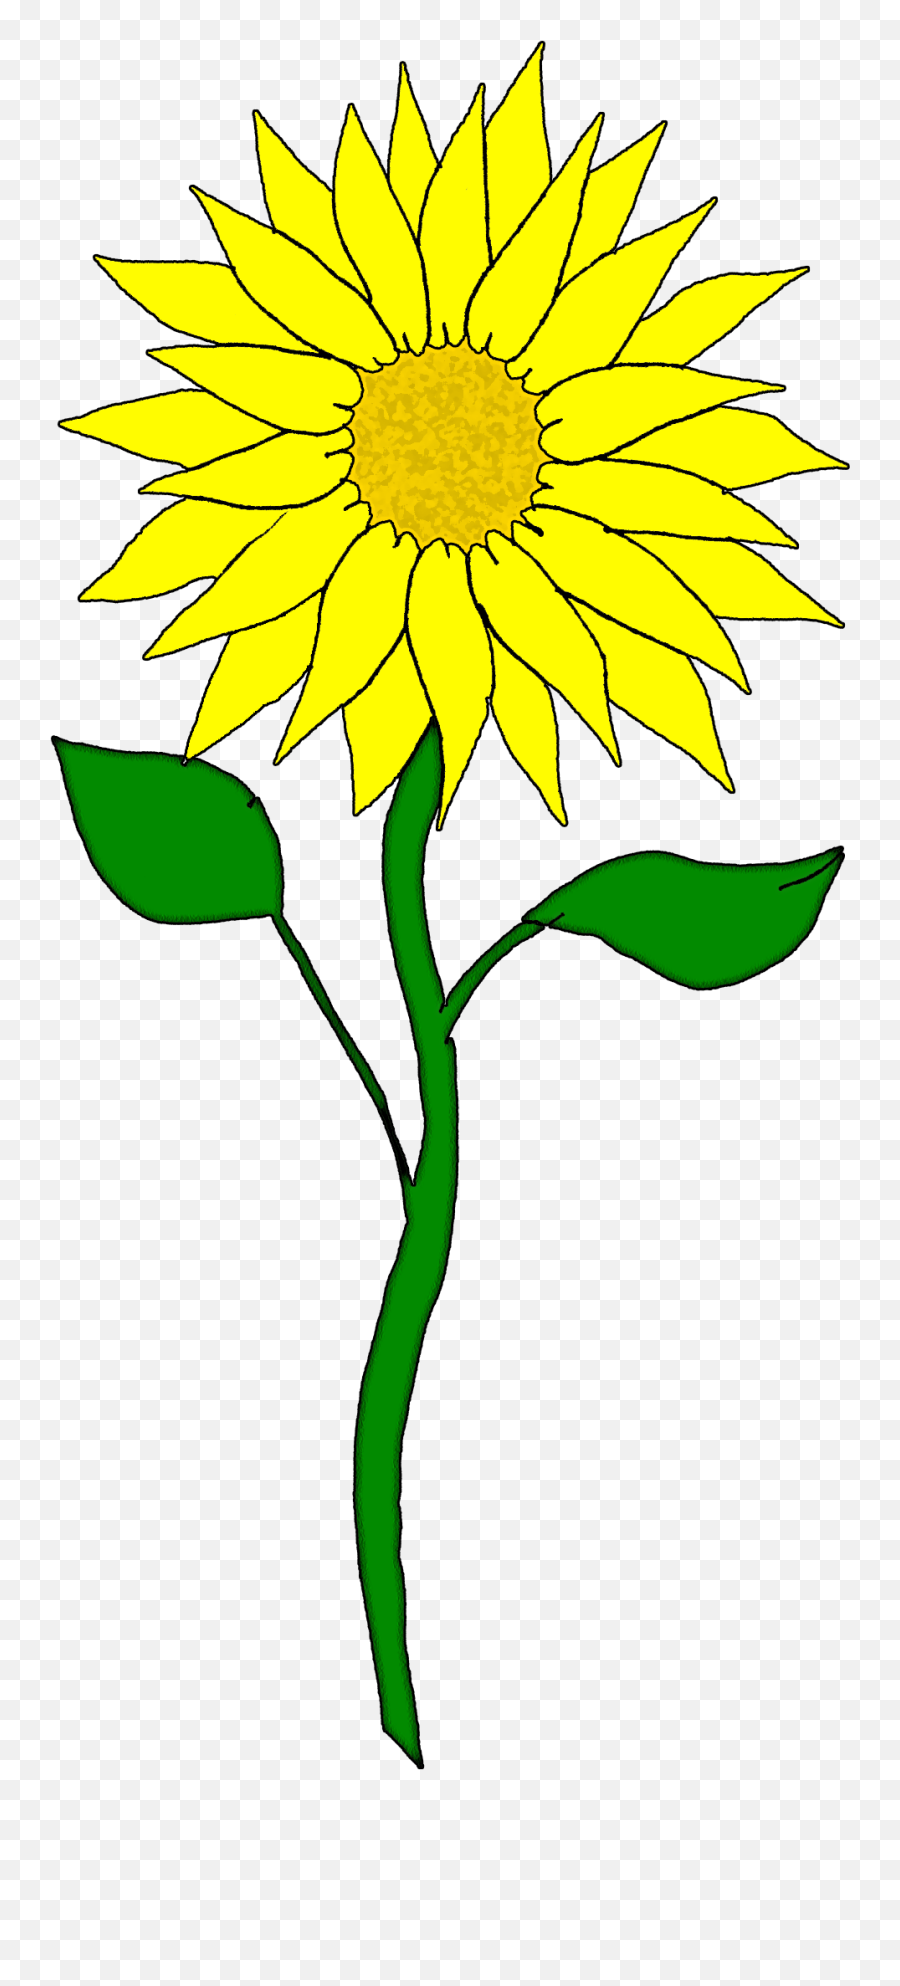 Download Sunflower Images 2 Png Image Clipart Free - Cliparts Sunflowers,Sun Flower Png